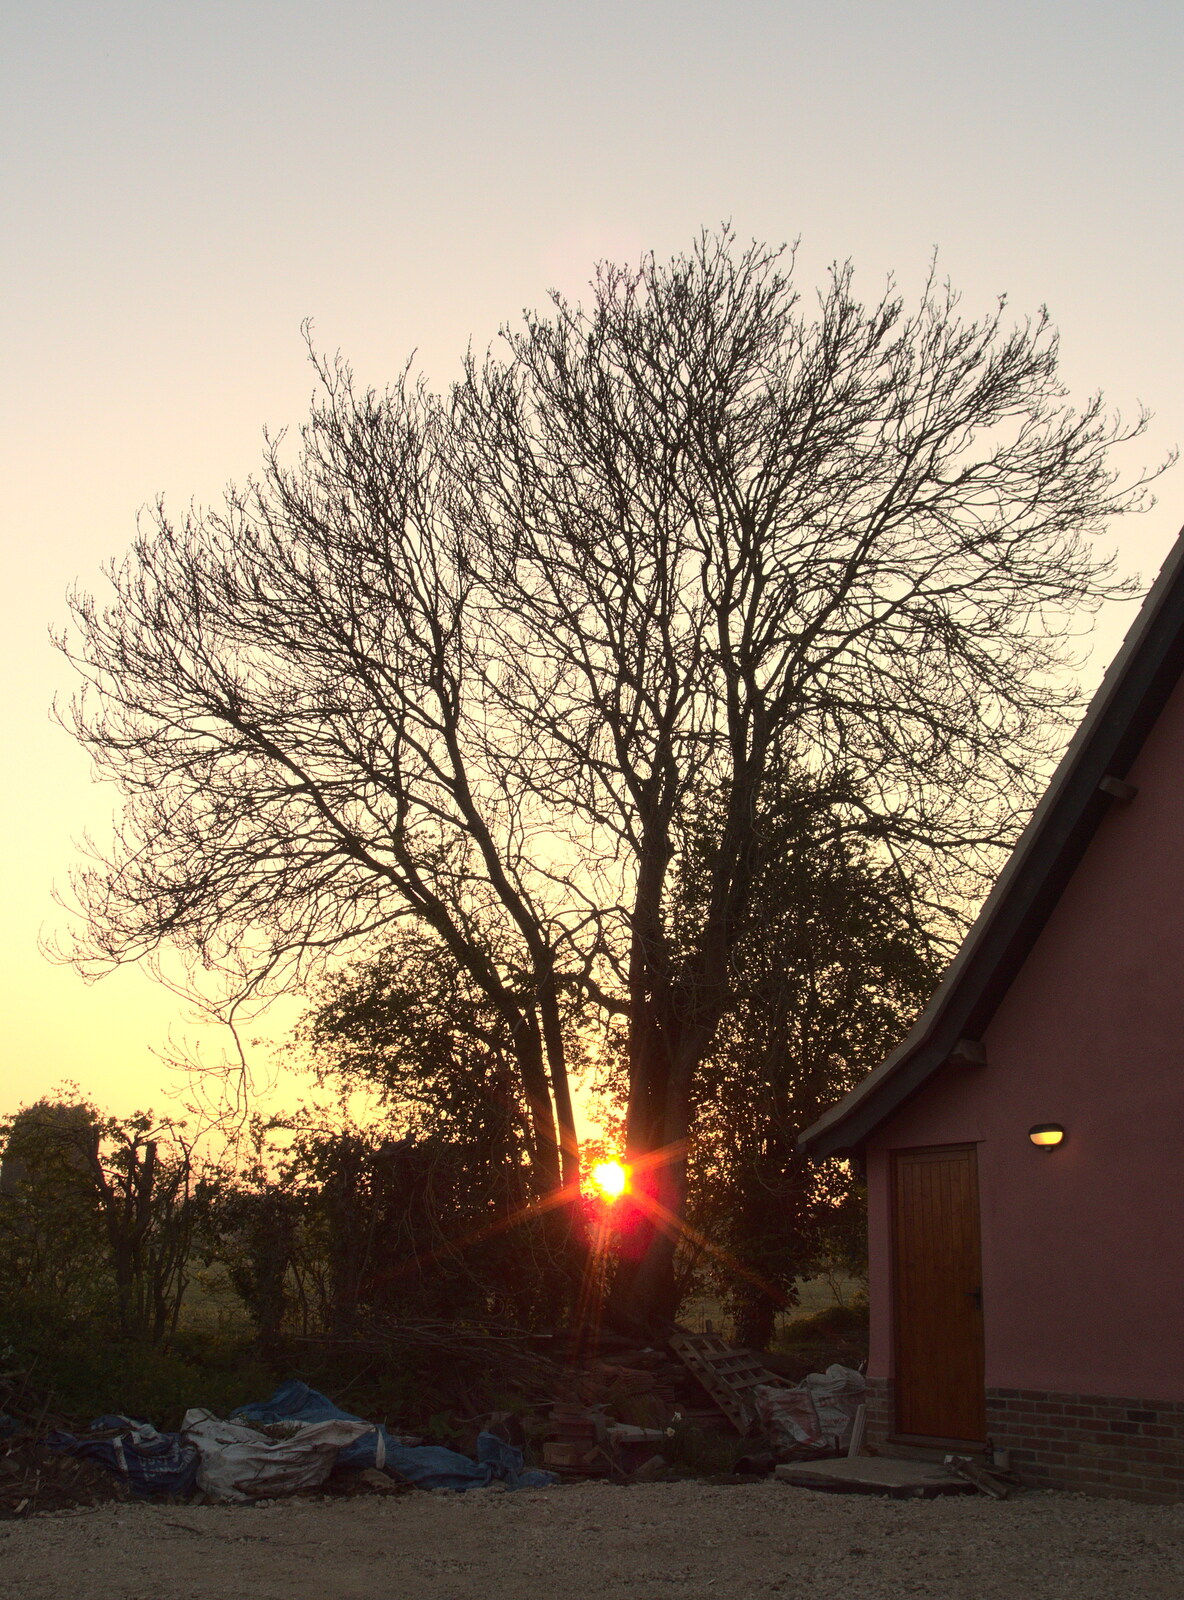 The sun sets through the ash tree from Comedy Night, and a Village Yard Sale, Eye and Brome, Suffolk - 8th April 2017